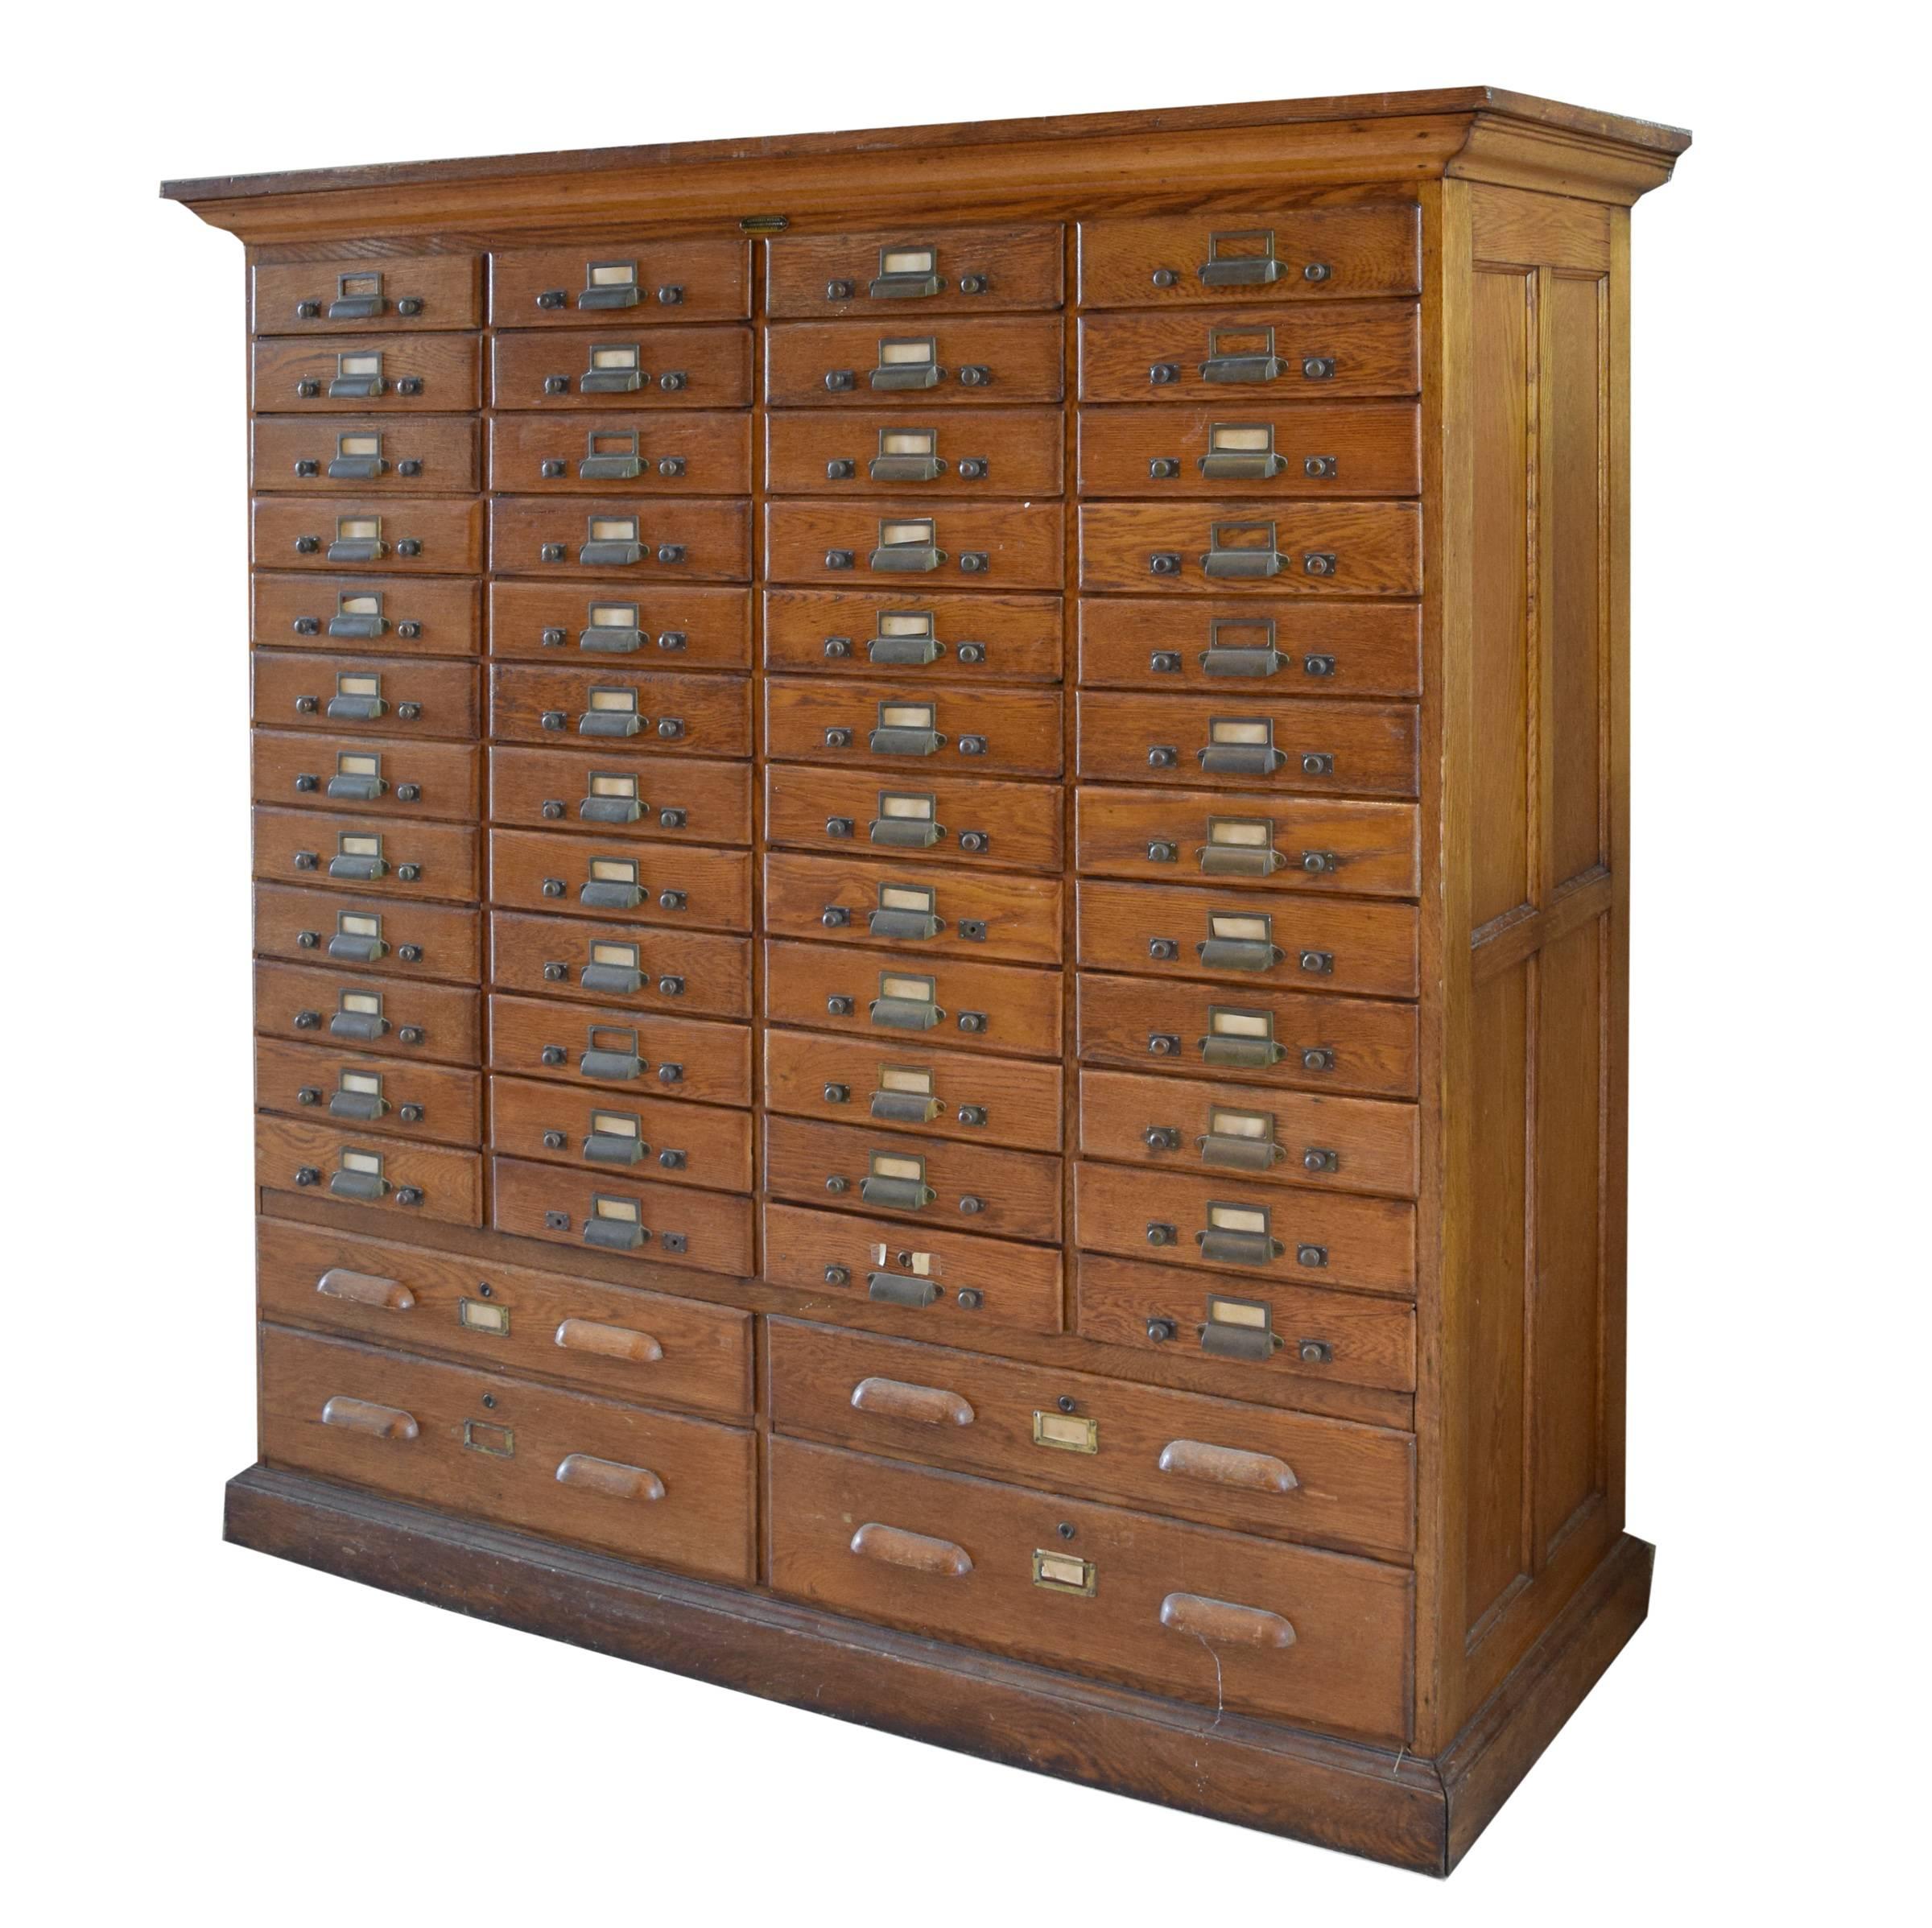 A 52-drawer card catalog. This oak piece was made by the Kewaunee Manufacturing Co of Kewaunee, Wi. Its many functional drawers makes it a great multi-use cabinet.
 